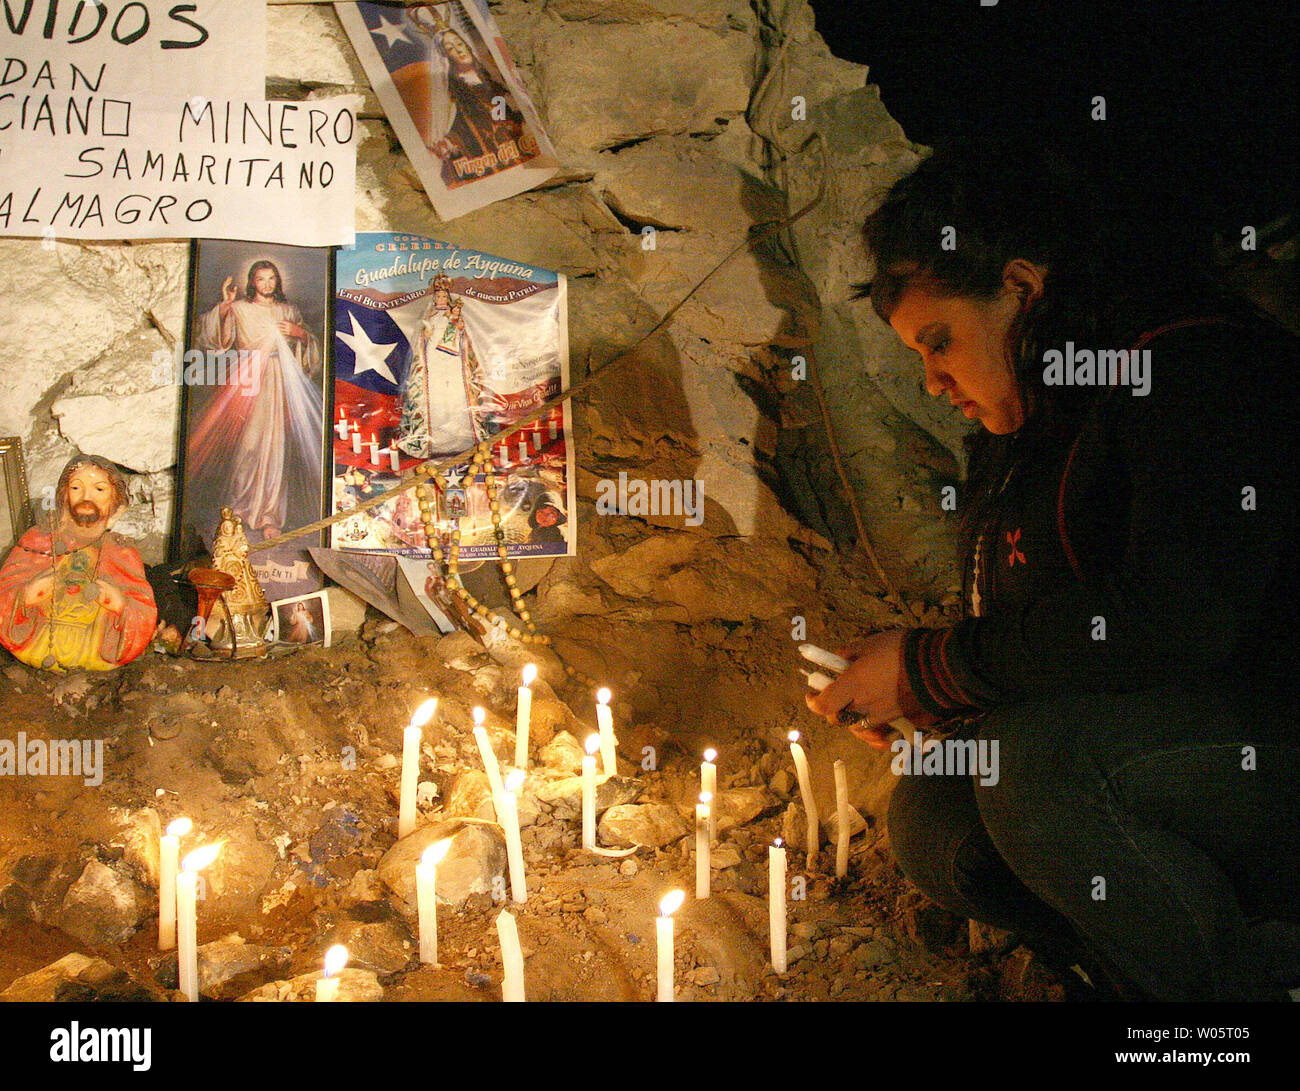 Relatives light candles near religious symbols as preparations continue to rescue the 33 trapped miners at San Jose Mine, Chile on October 12, 2010.   If all goes well, officials say the first miners will be brought up within a day via a 20-minute ride in a rescue capsule more than 2,000 feet below the surface.   The miners have been trapped for more than two months.   UPI/Sebastian Padilla Stock Photo